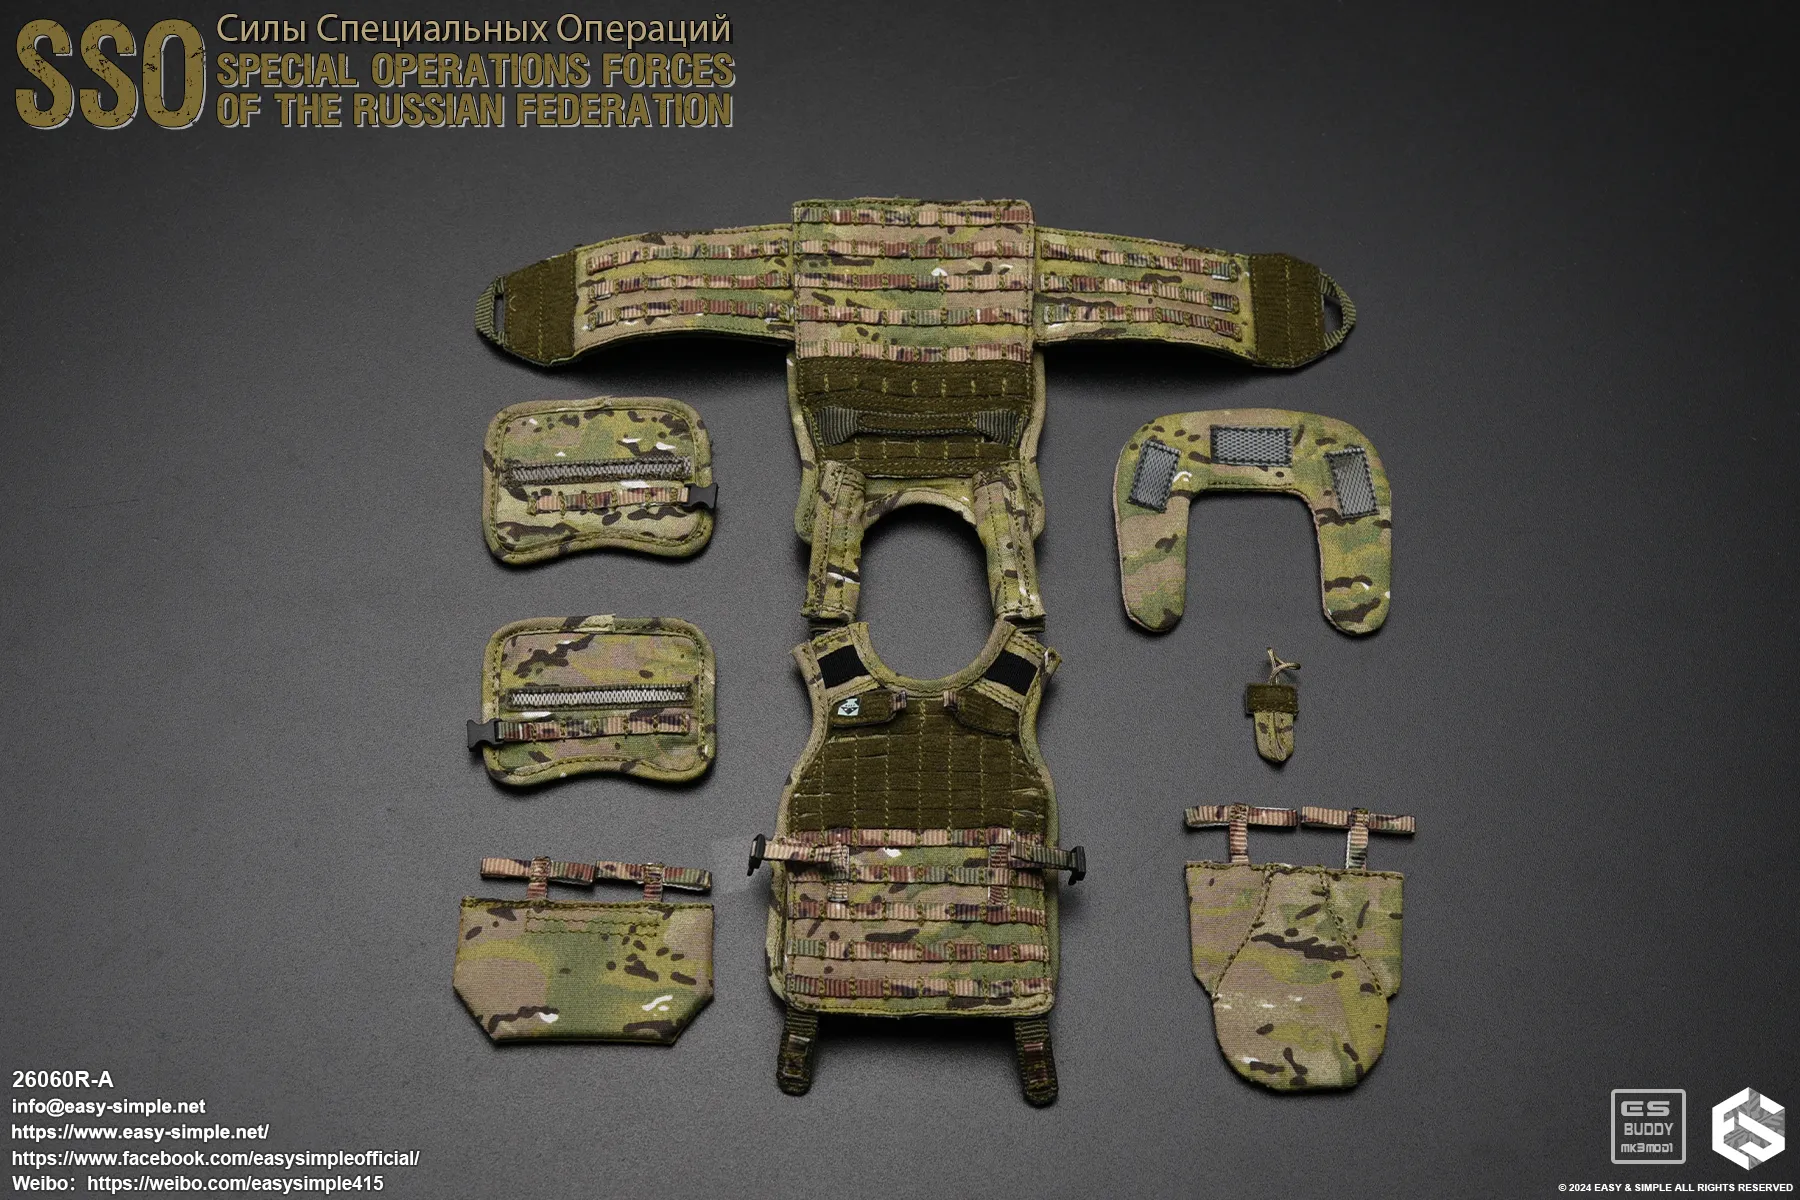 forces - NEW PRODUCT: Easy&Simple 26060R-A Russian Special Operations Forces (SSO) Format,webp